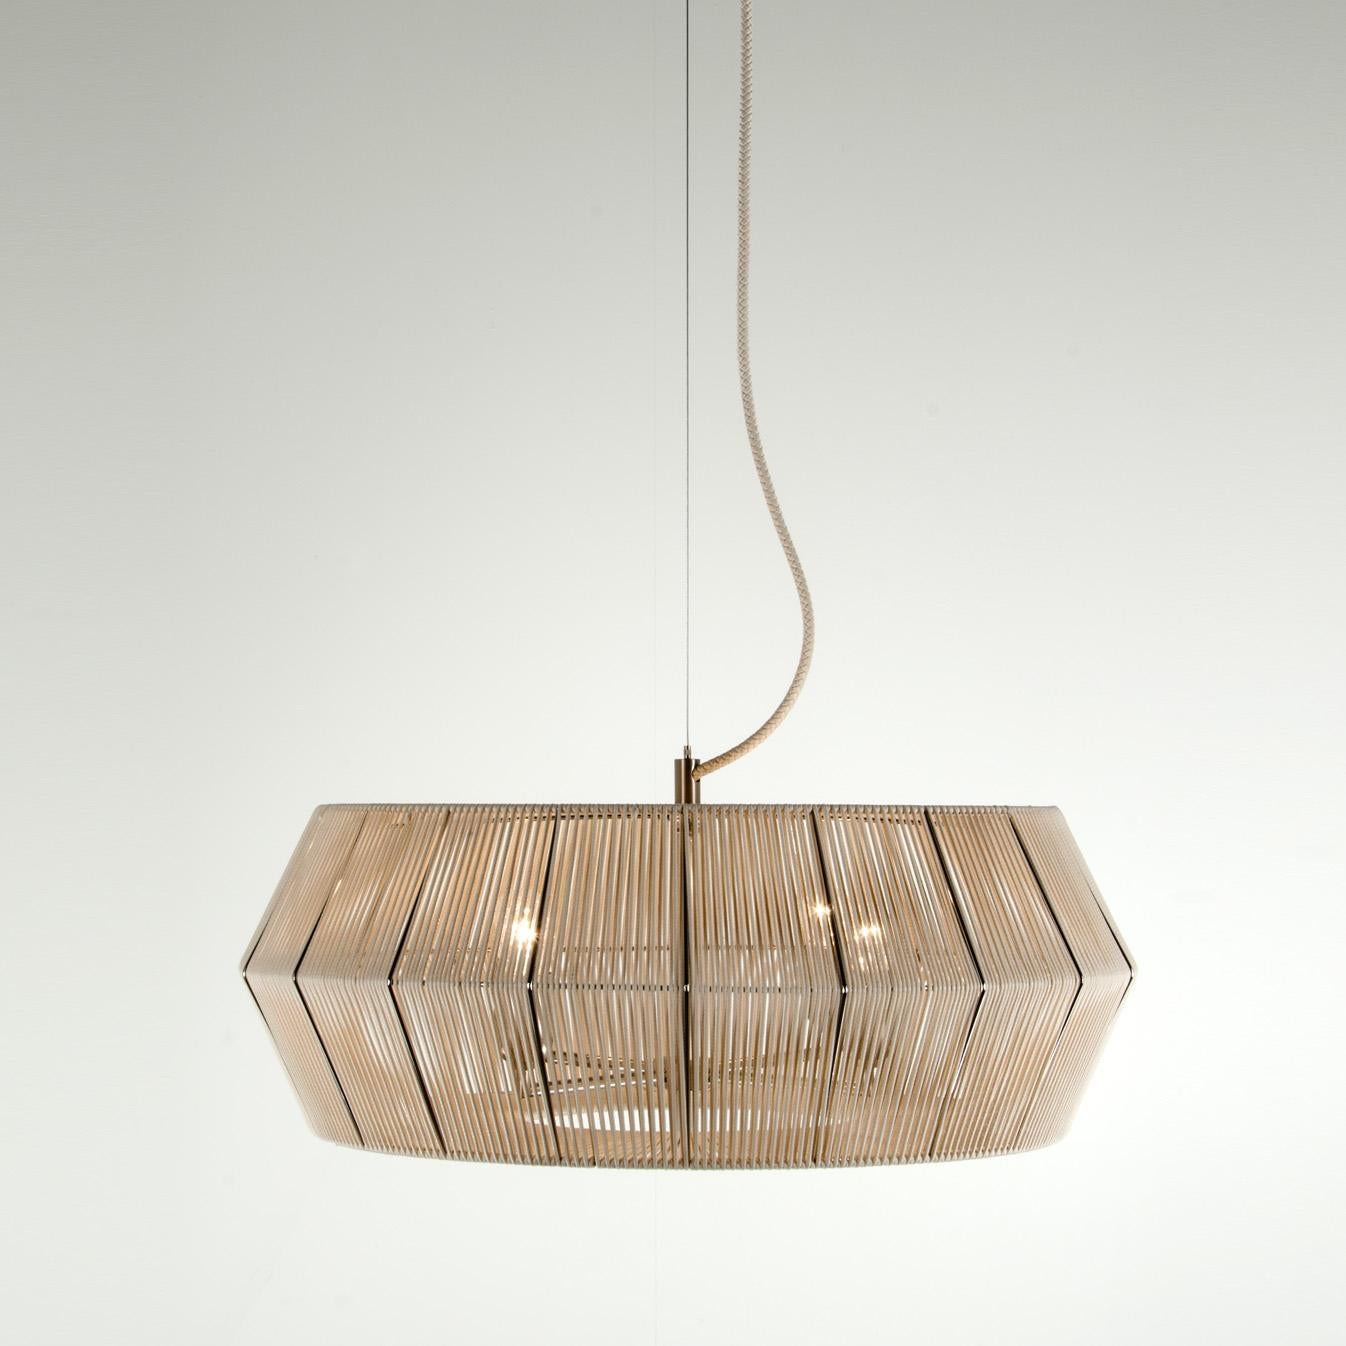 The peculiarity that makes this collection unique is the lampshade and its particular shape: available in brown eco leather and white string. A system of repeating proportions and modules, wisely assembled by the experts hands of the artisans. The